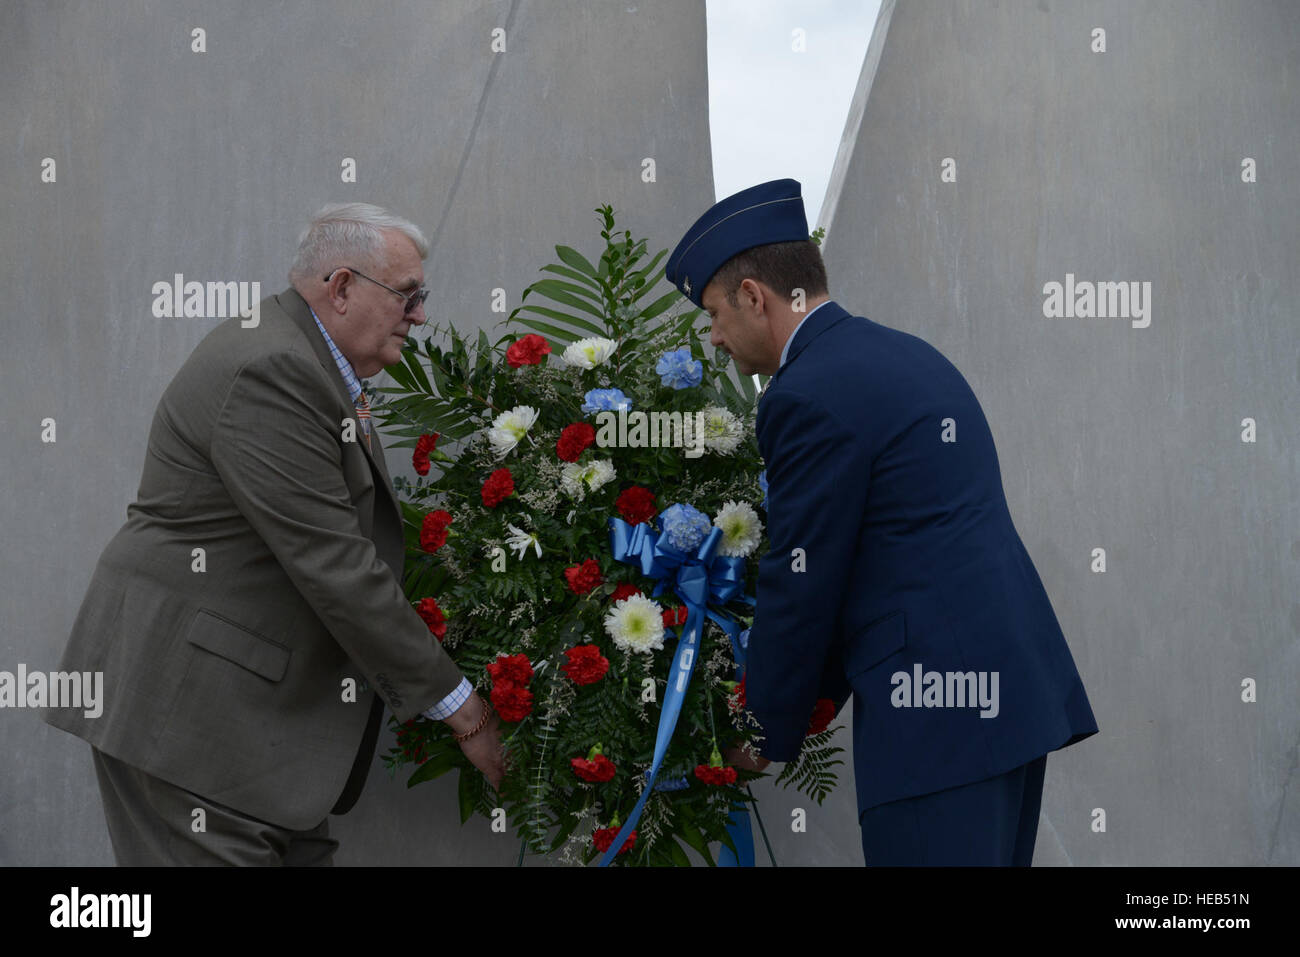 Retired Air Force Col. Wayne Erwin, Red River Valley Association; and Air Force Col. Gerald V. Goodfellow, 12th Flying Training Wing commander, place the wreath at the Joint Base San Antonio-Randolph Missing Man Monument during a wreath laying ceremony to honor prisoners of war and those missing in action March 28. For the past 41 years, the 560th Flying Training Squadron has hosted the Freedom Flyer Reunion for members of the 4th Allied POW Wing. In addition to the wreath laying ceremony, each year a symposium that includes speakers representing POWs and spouses of POWs is also held at JBSA-R Stock Photo